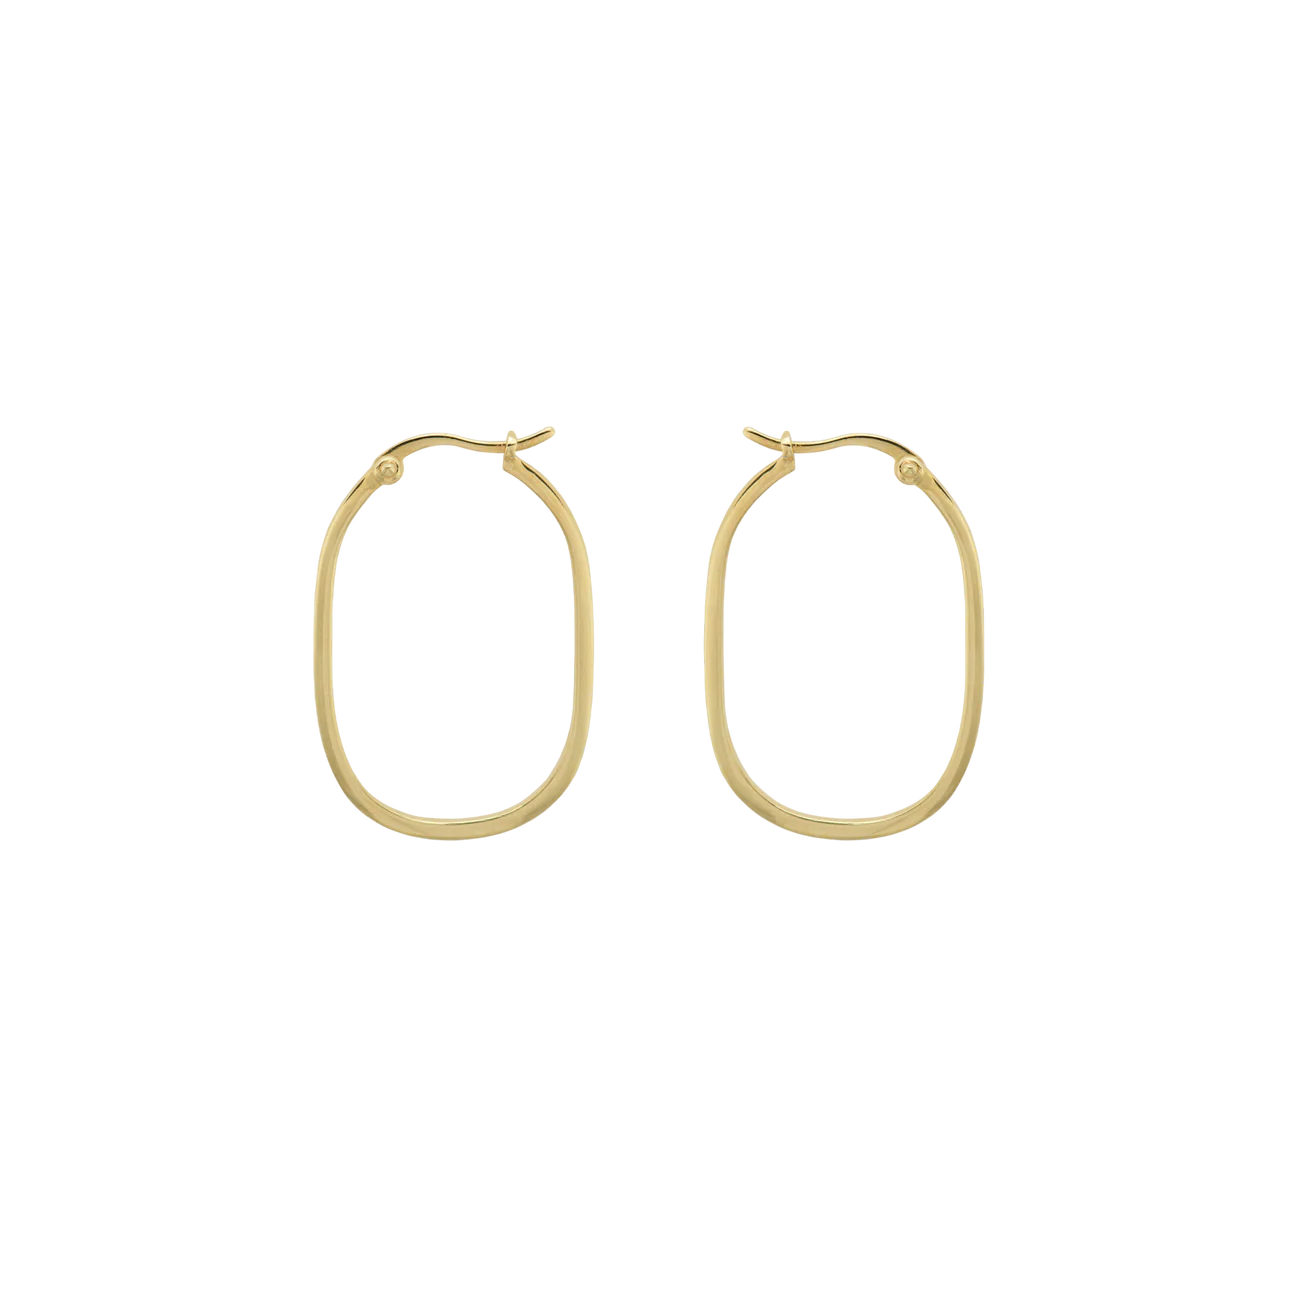 Classic Link Hoop Earrings in shimmering gold, showcasing a timeless geometric shape on a sleek black background, by Anna + Nina.